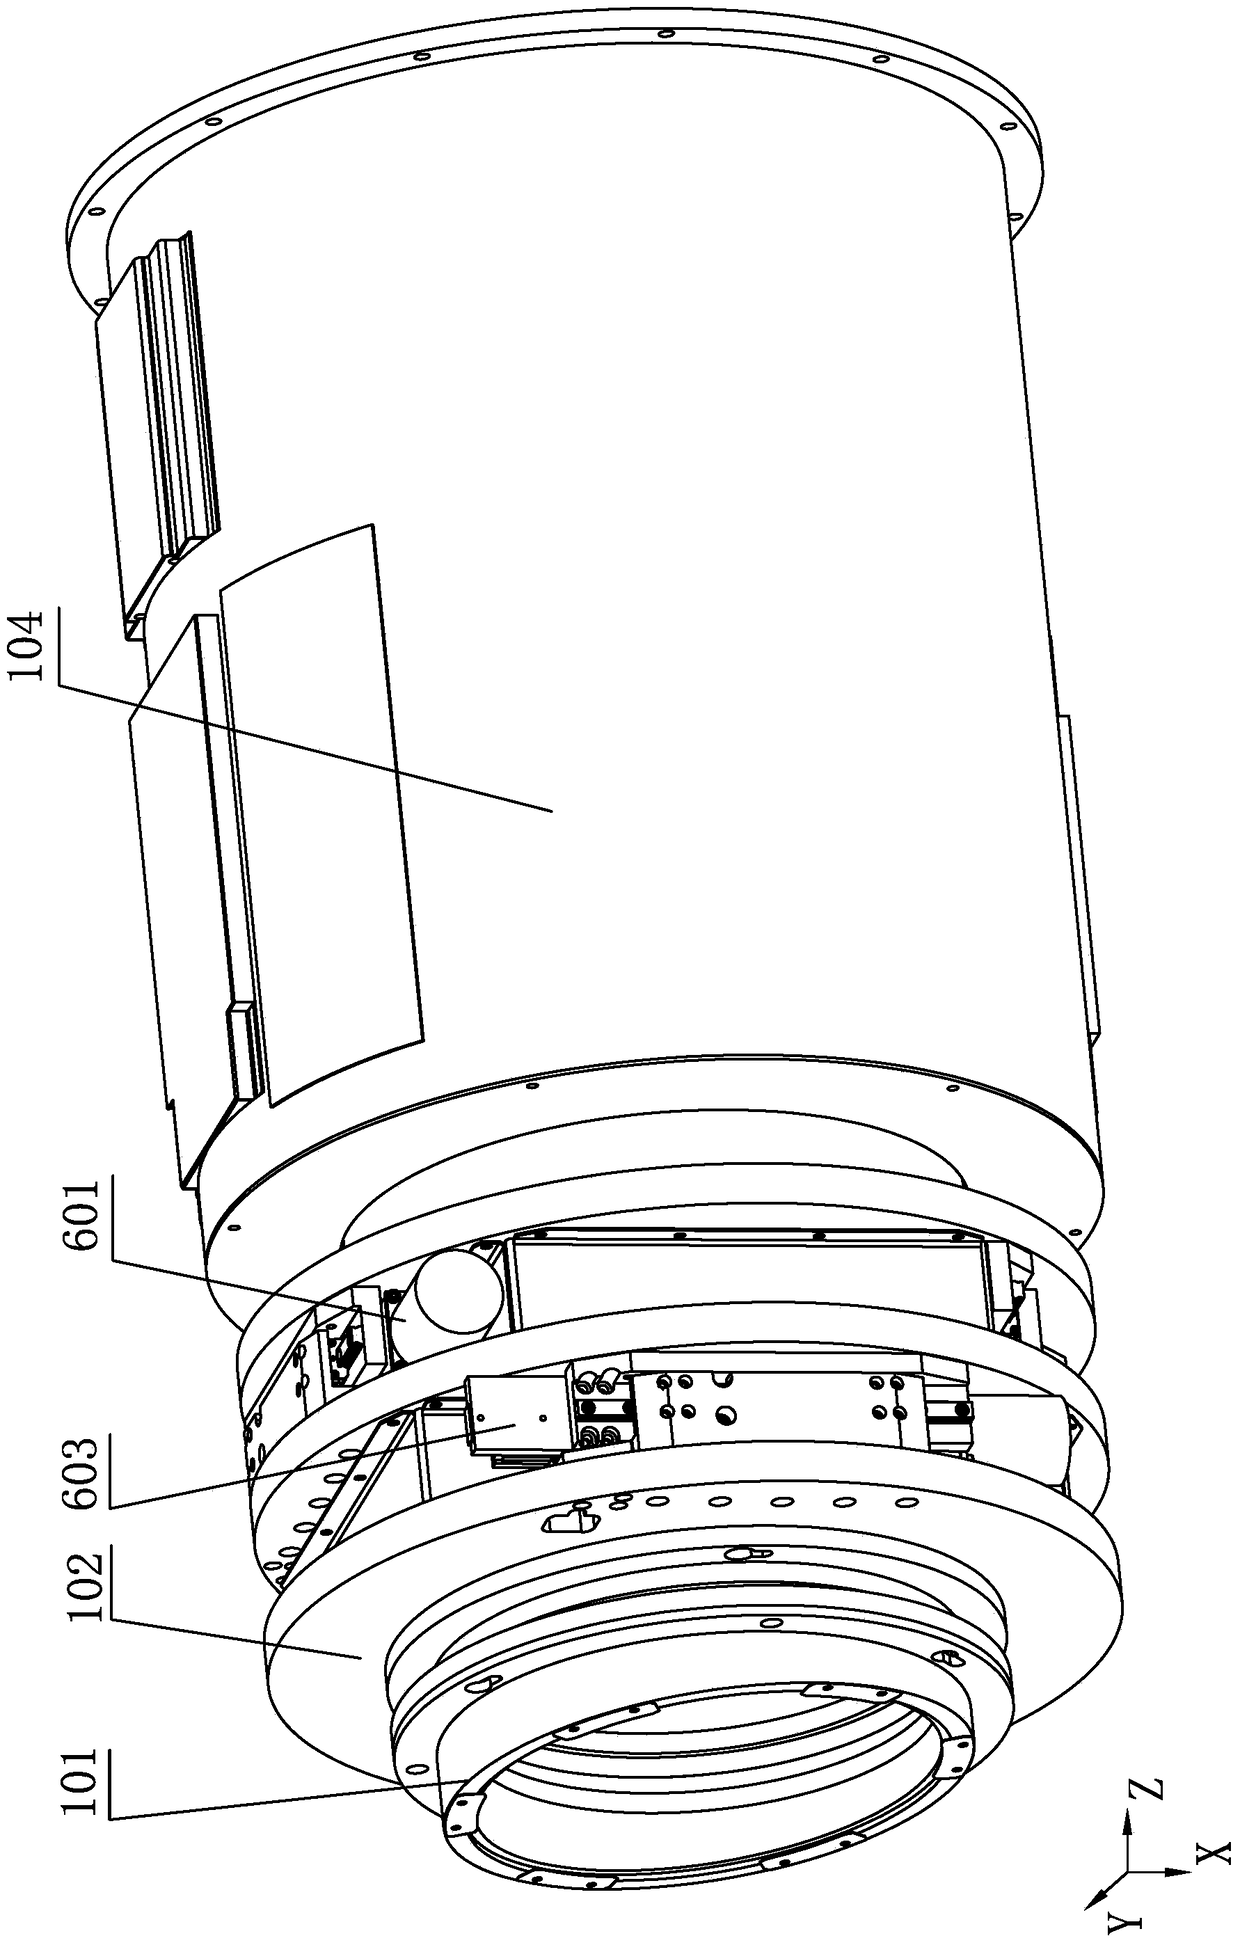 A high-power focusing lens with adjustable focus